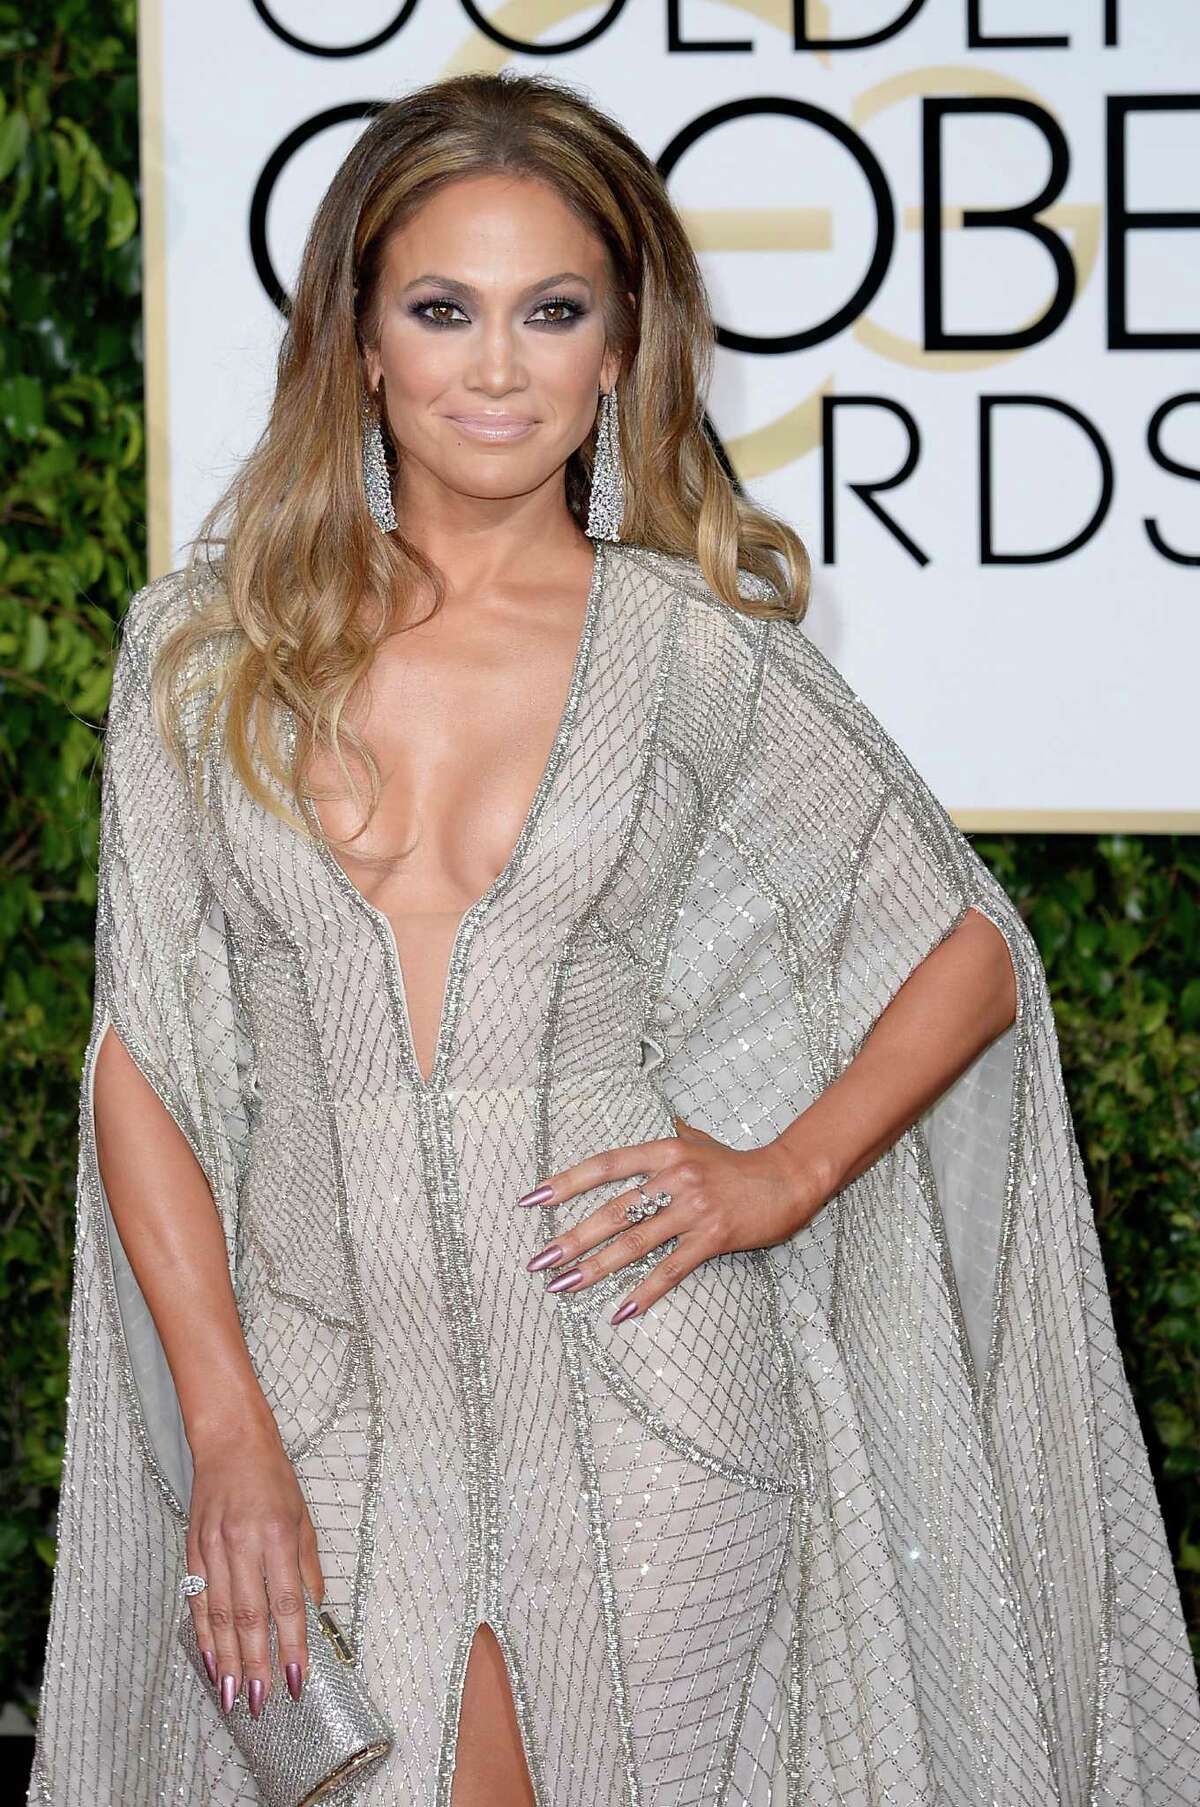 BEVERLY HILLS, CA - JANUARY 11: 72nd ANNUAL GOLDEN GLOBE AWARDS -- Pictured: Actress/singer Jennifer Lopez arrives to the 72nd Annual Golden Globe Awards held at the Beverly Hilton Hotel on January 11, 2015.